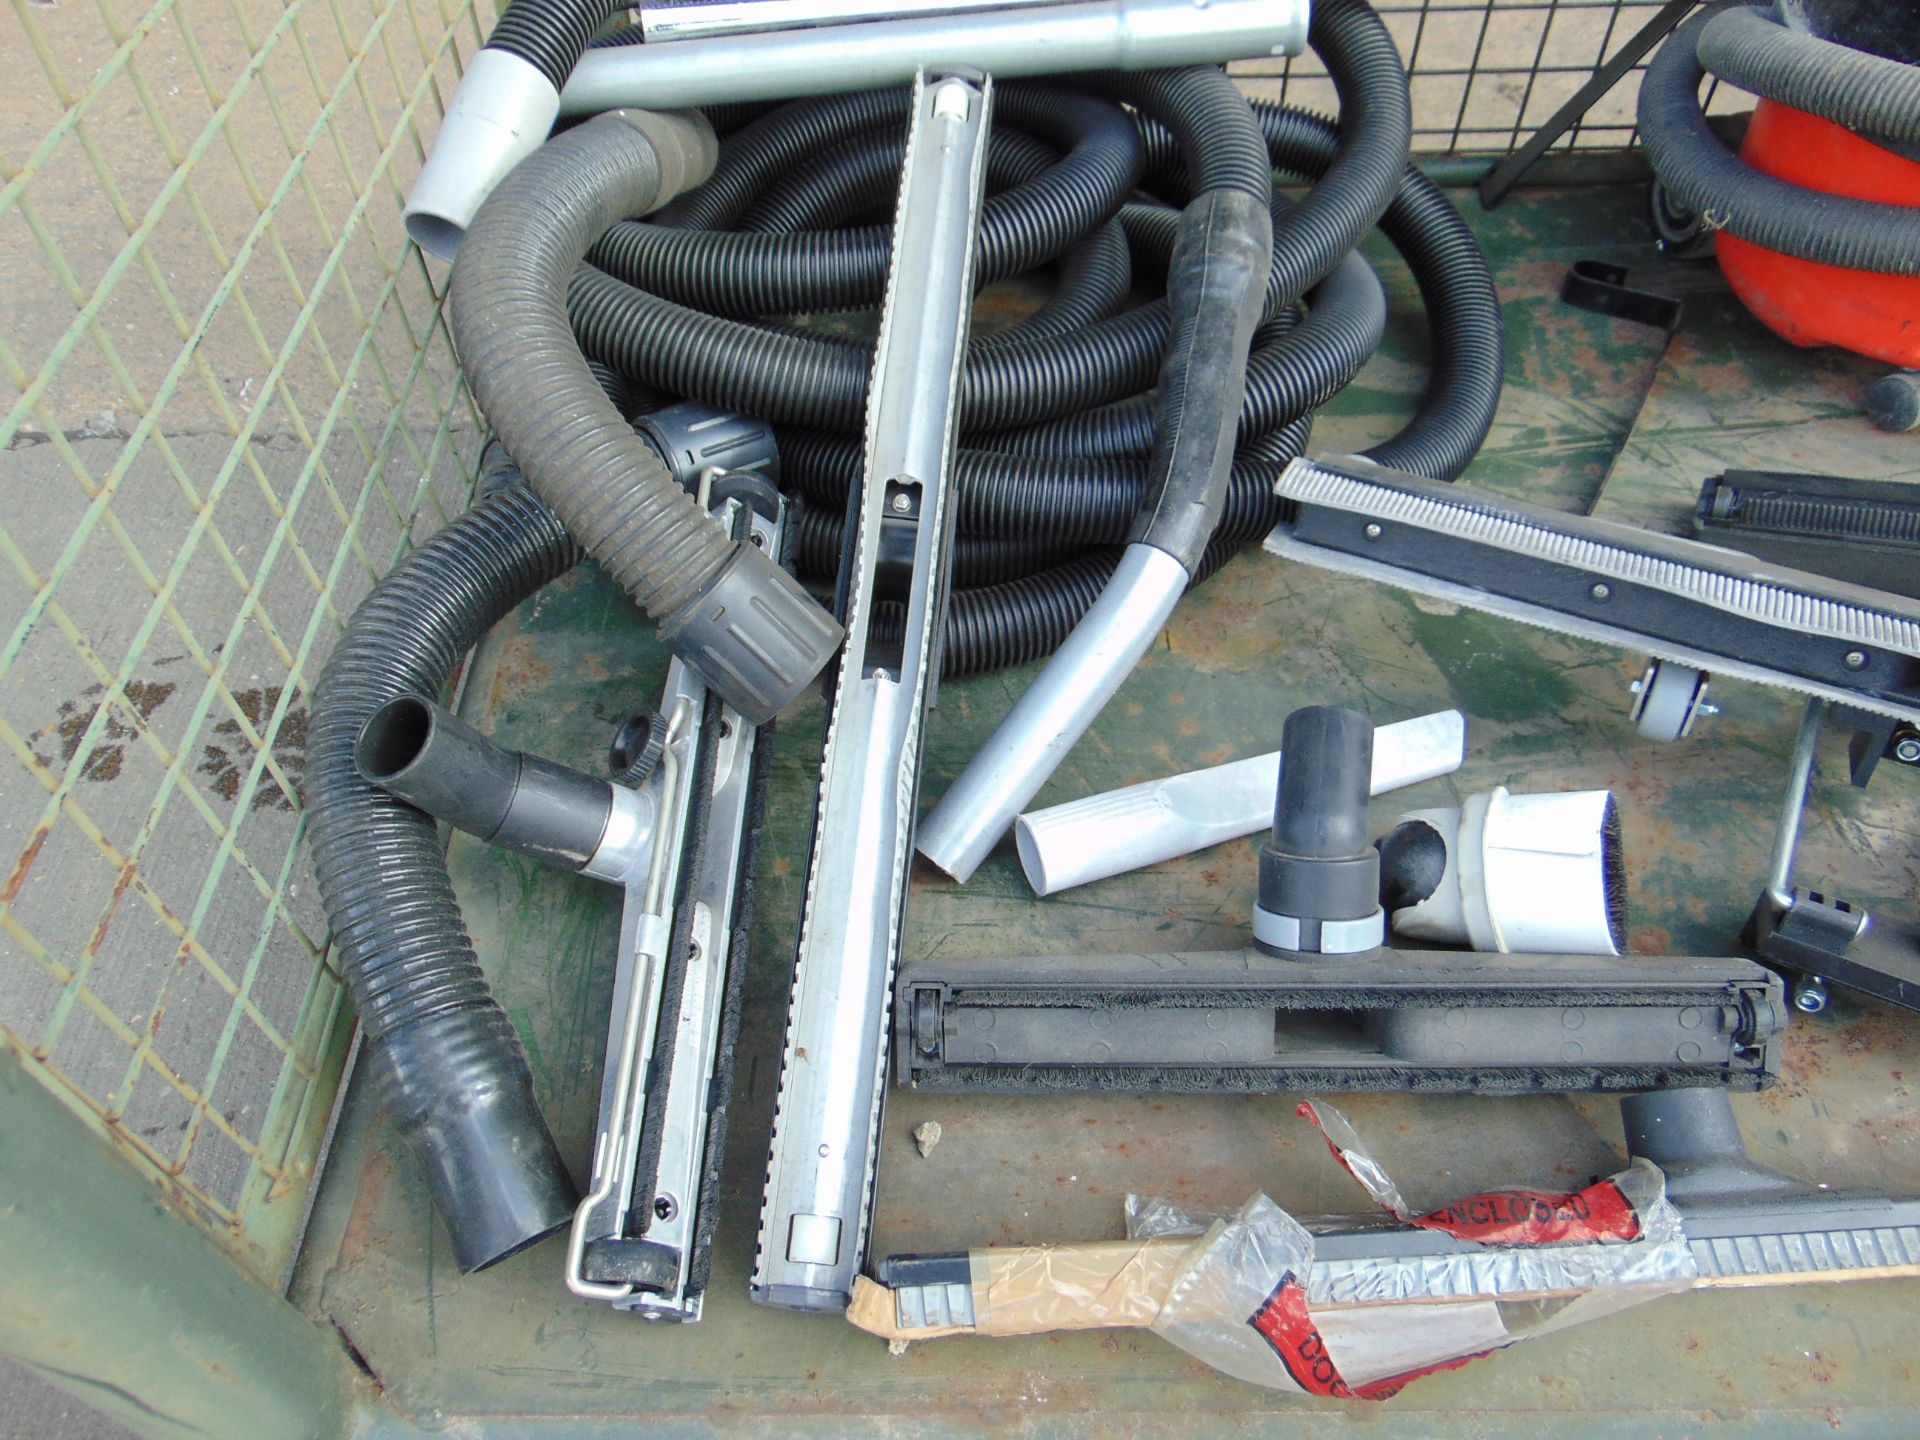 1 x Euroclean Shop Vacuum & Henry Vacuum w/ Trolley, Piping, Various Attachments etc. - Image 9 of 11